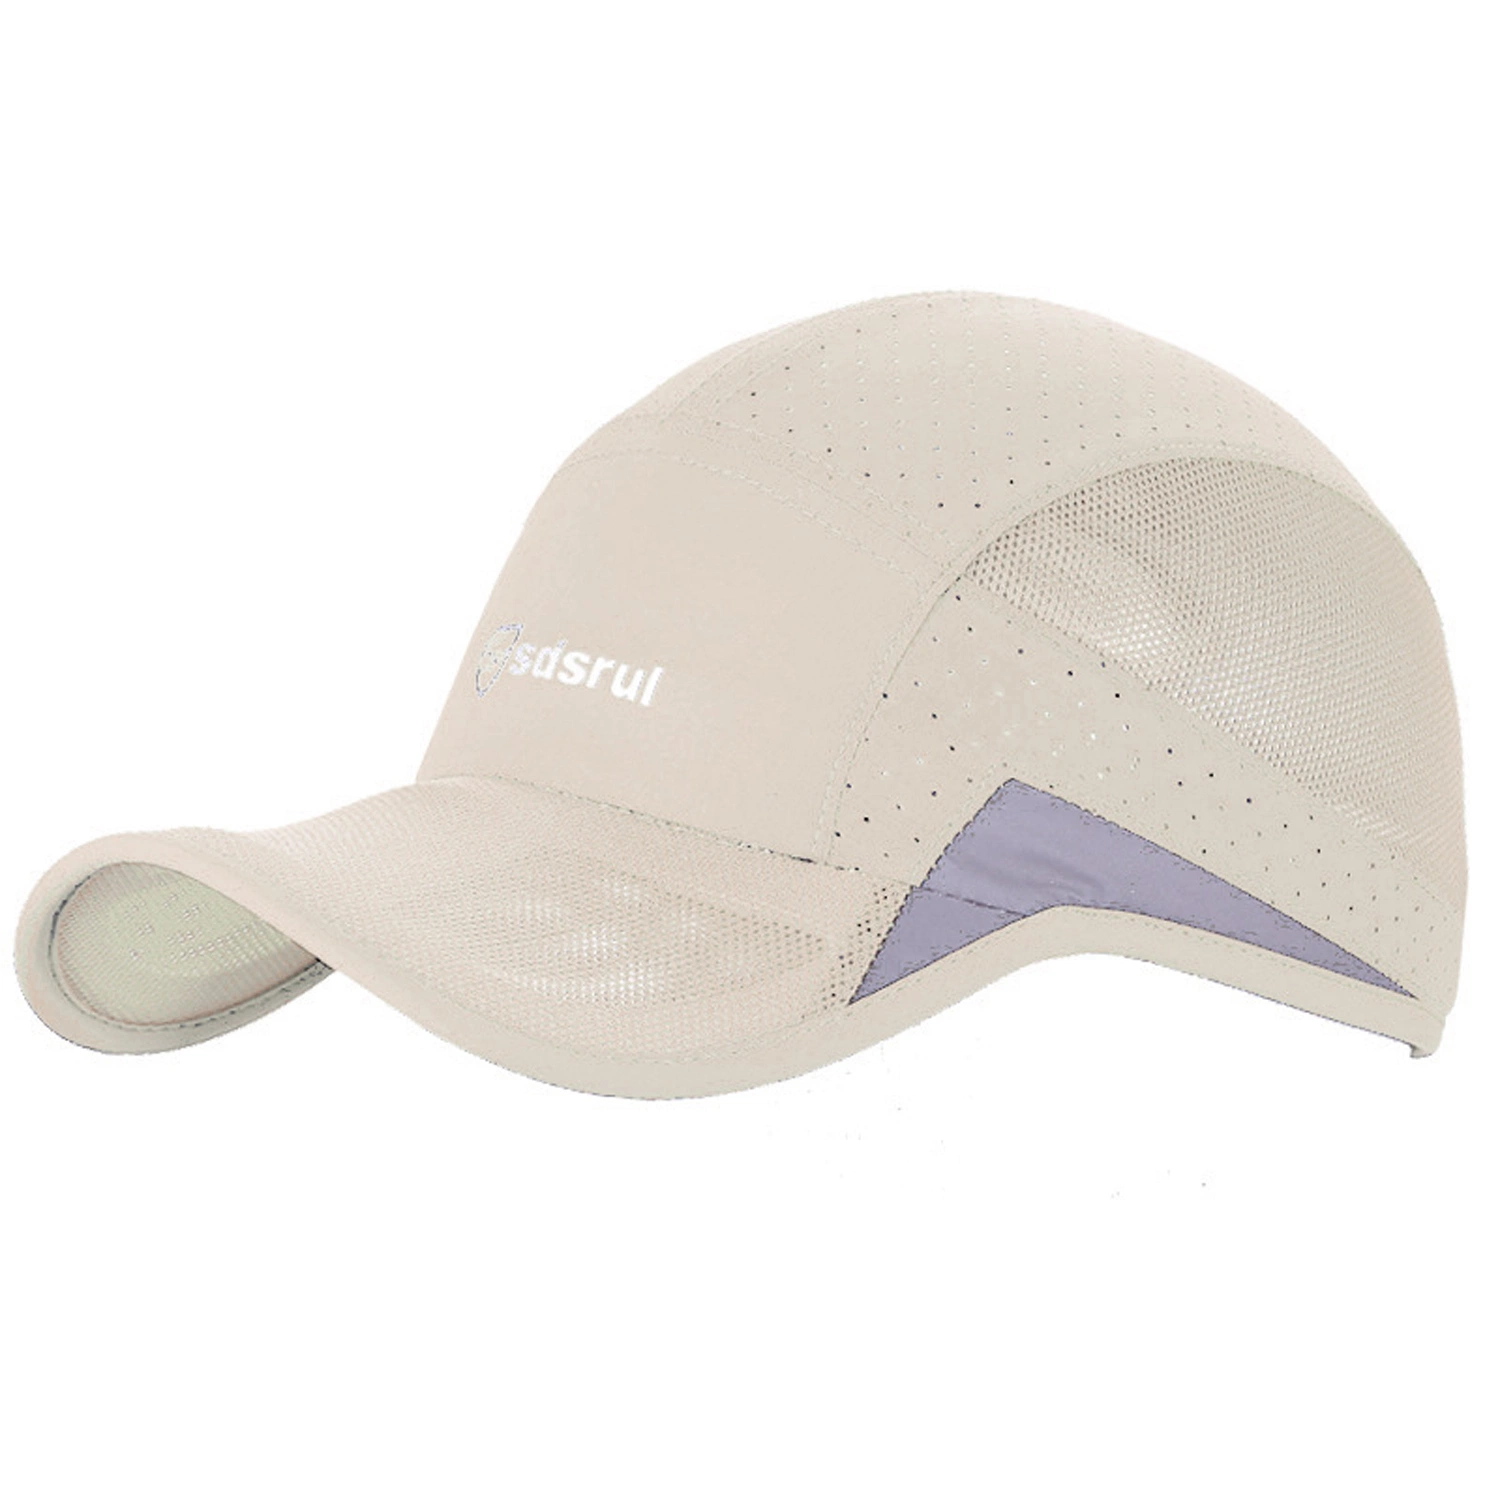 Cool Sun Hat Outdoor Cap Breathable Quick Drying Waterproof Unstructured Running Climbing Sports Caps for Men Women